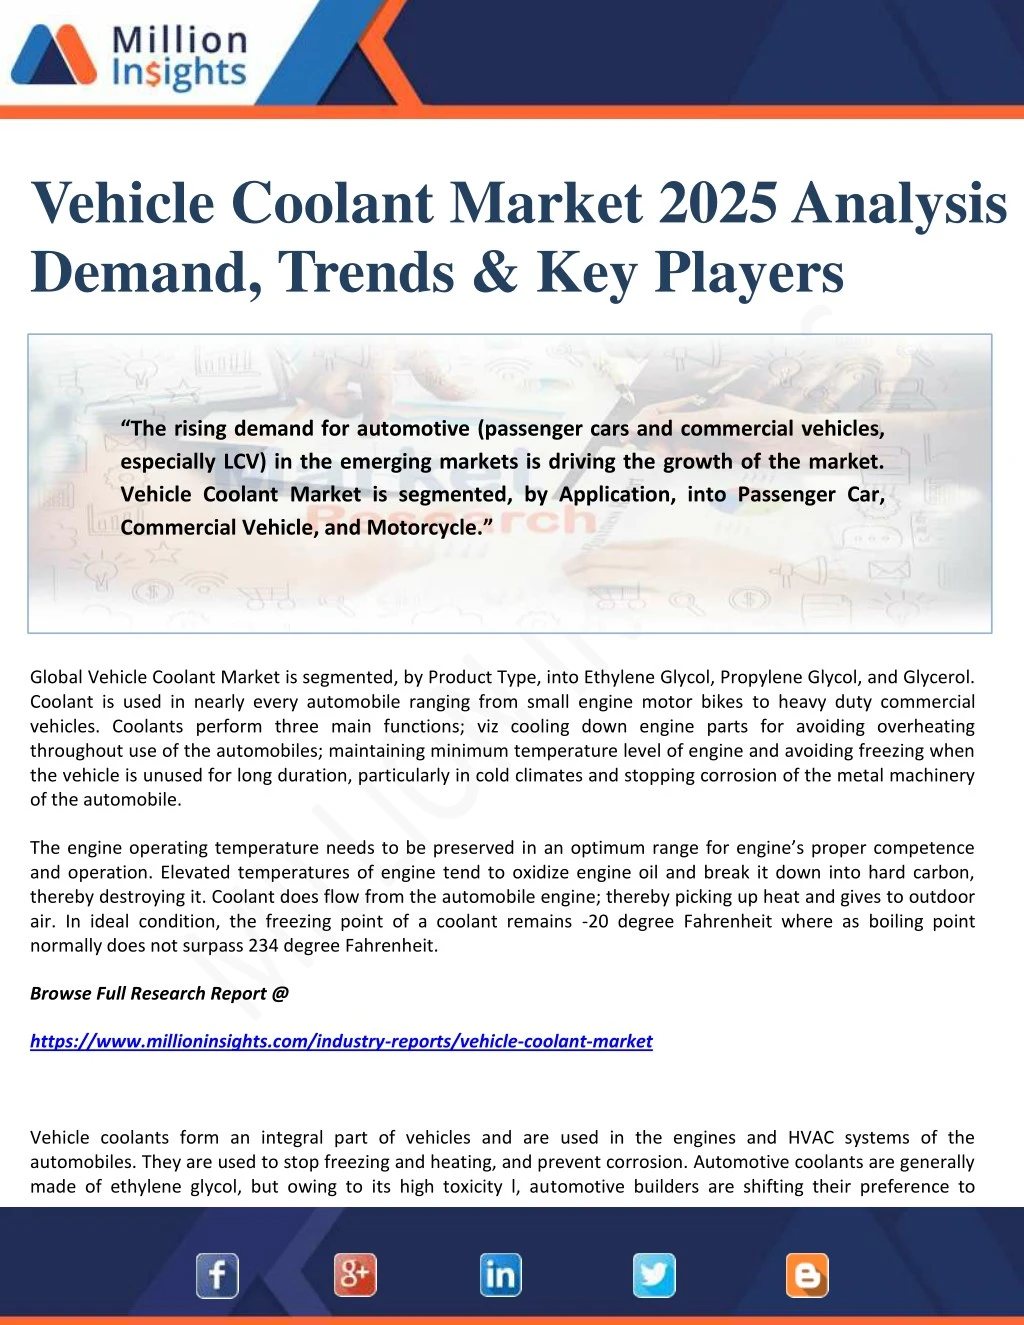 vehicle coolant market 2025 analysis by demand